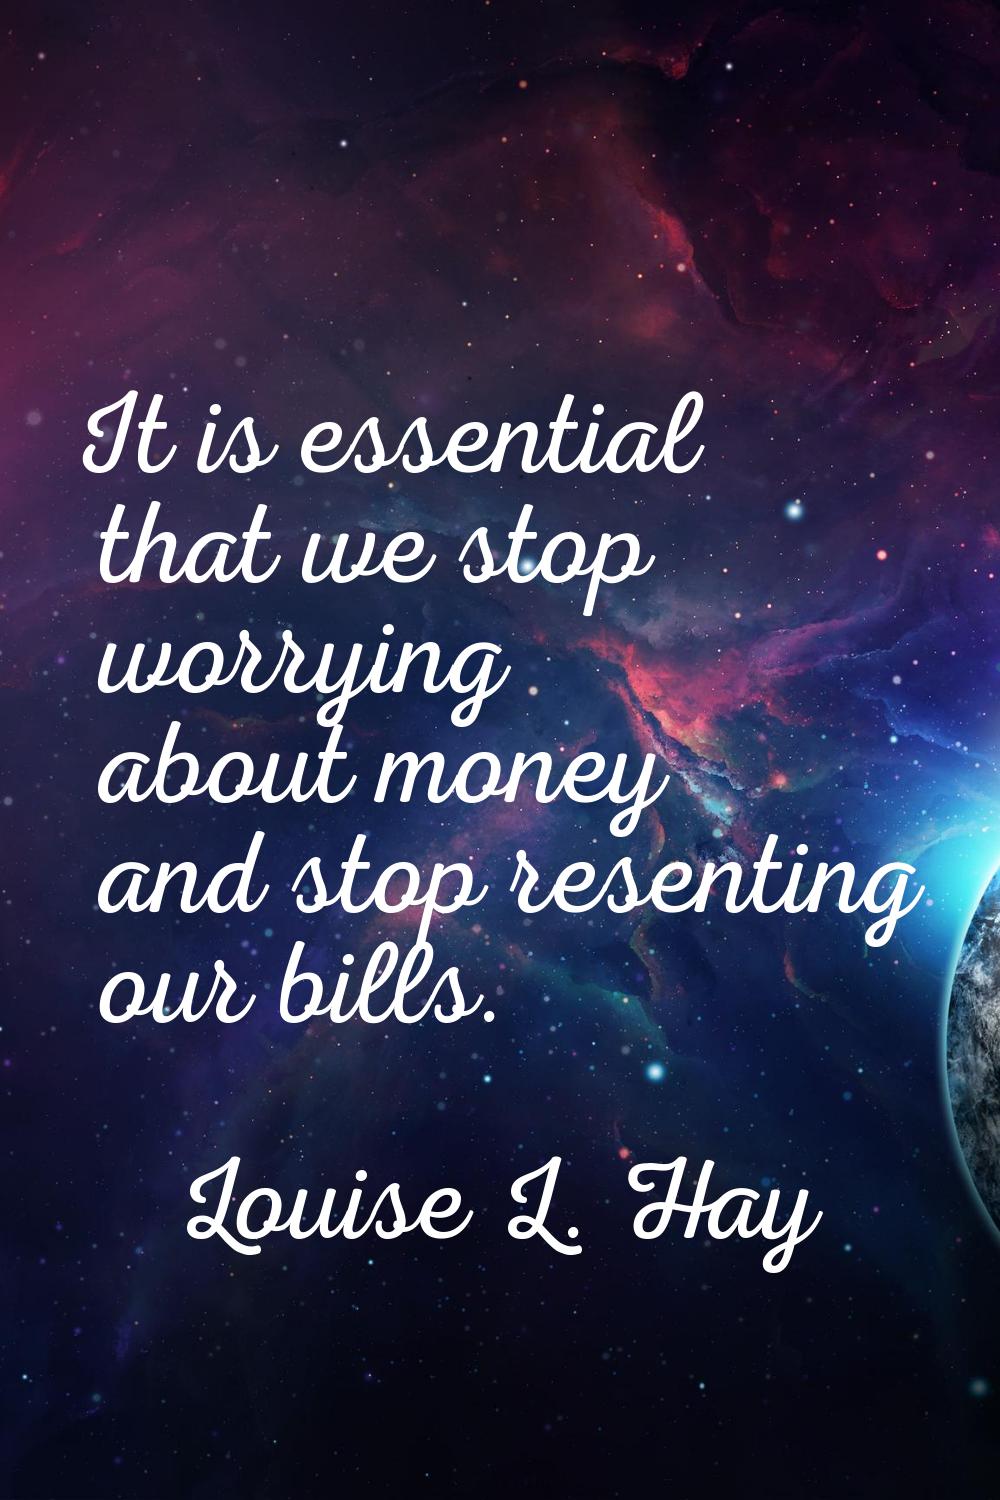 It is essential that we stop worrying about money and stop resenting our bills.